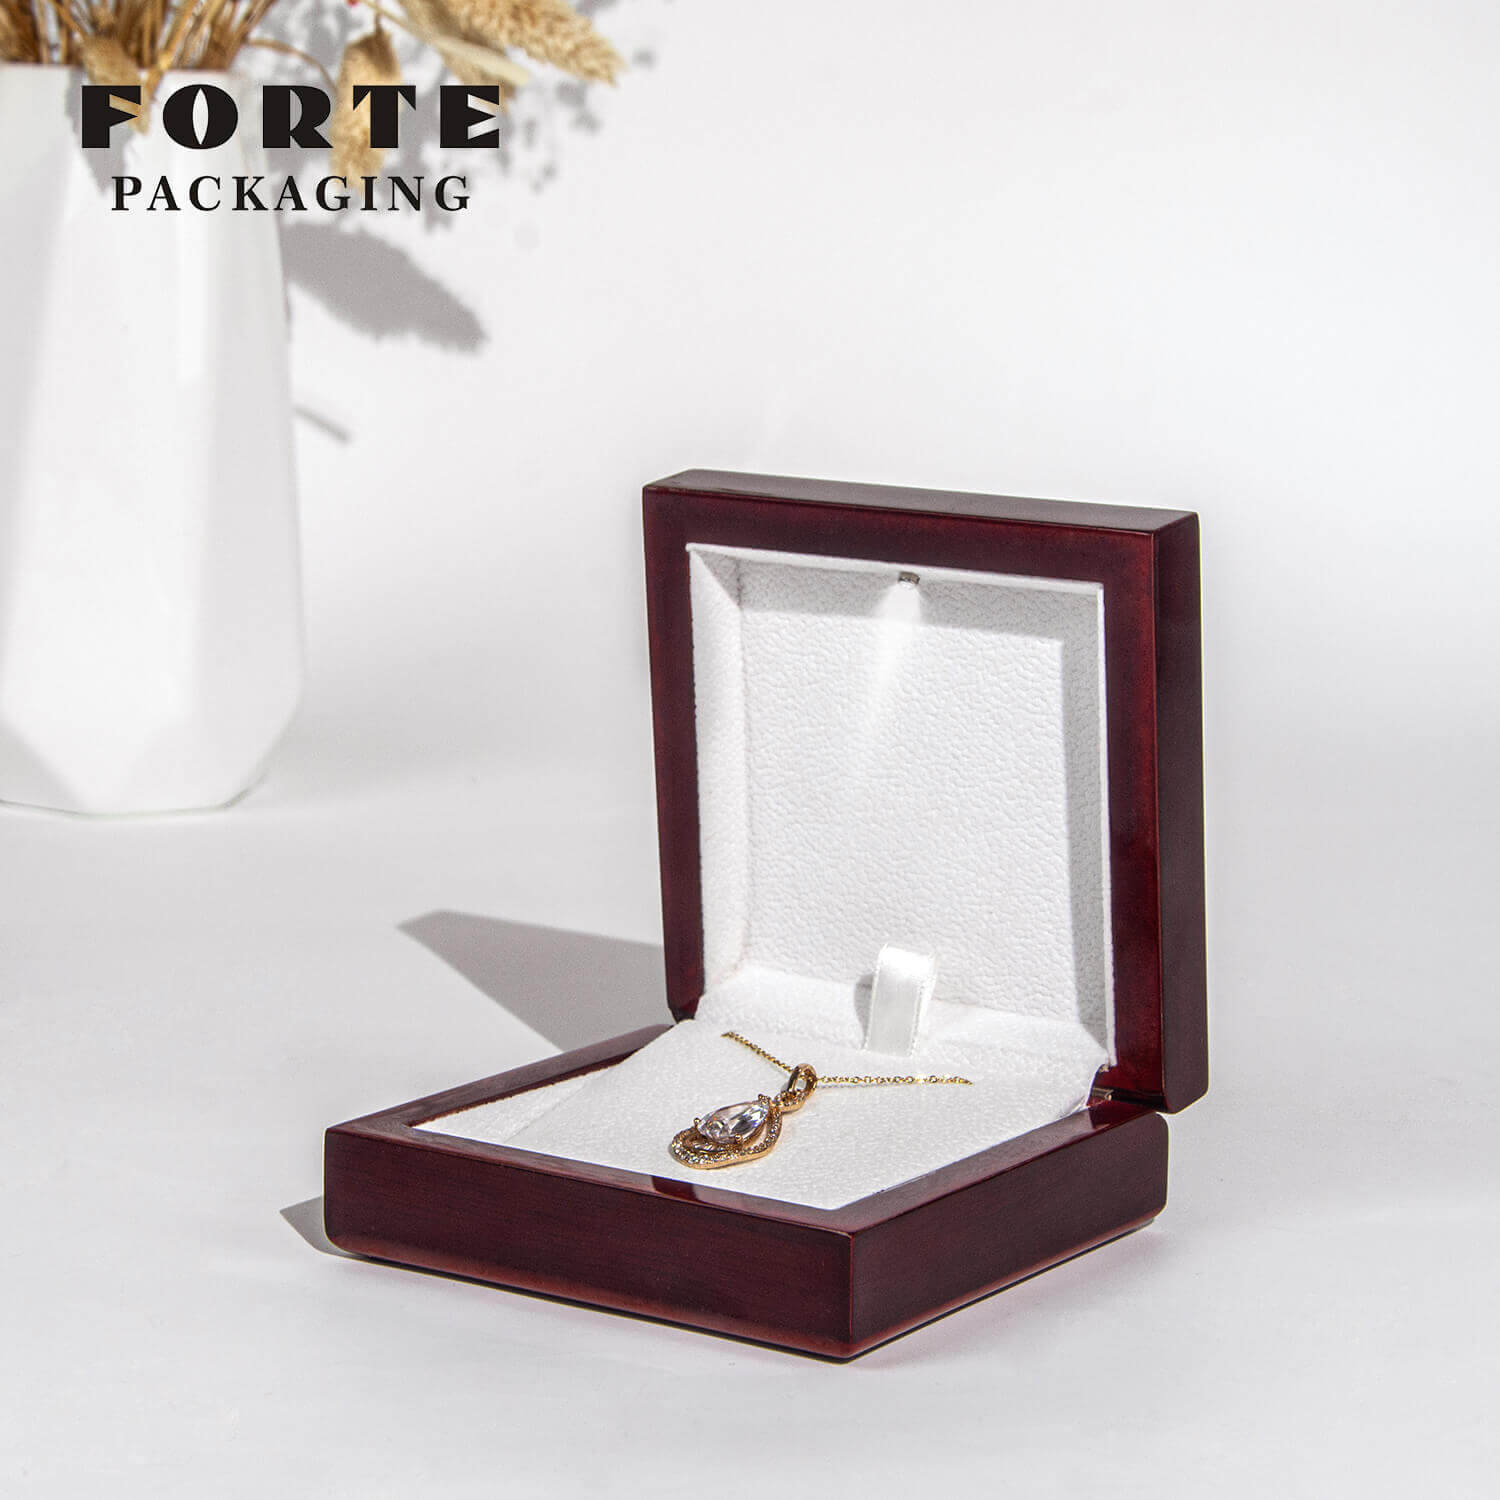 FORTE hot sell sample free inventory wooden jewelry packaging box LED pendant necklace box with light 